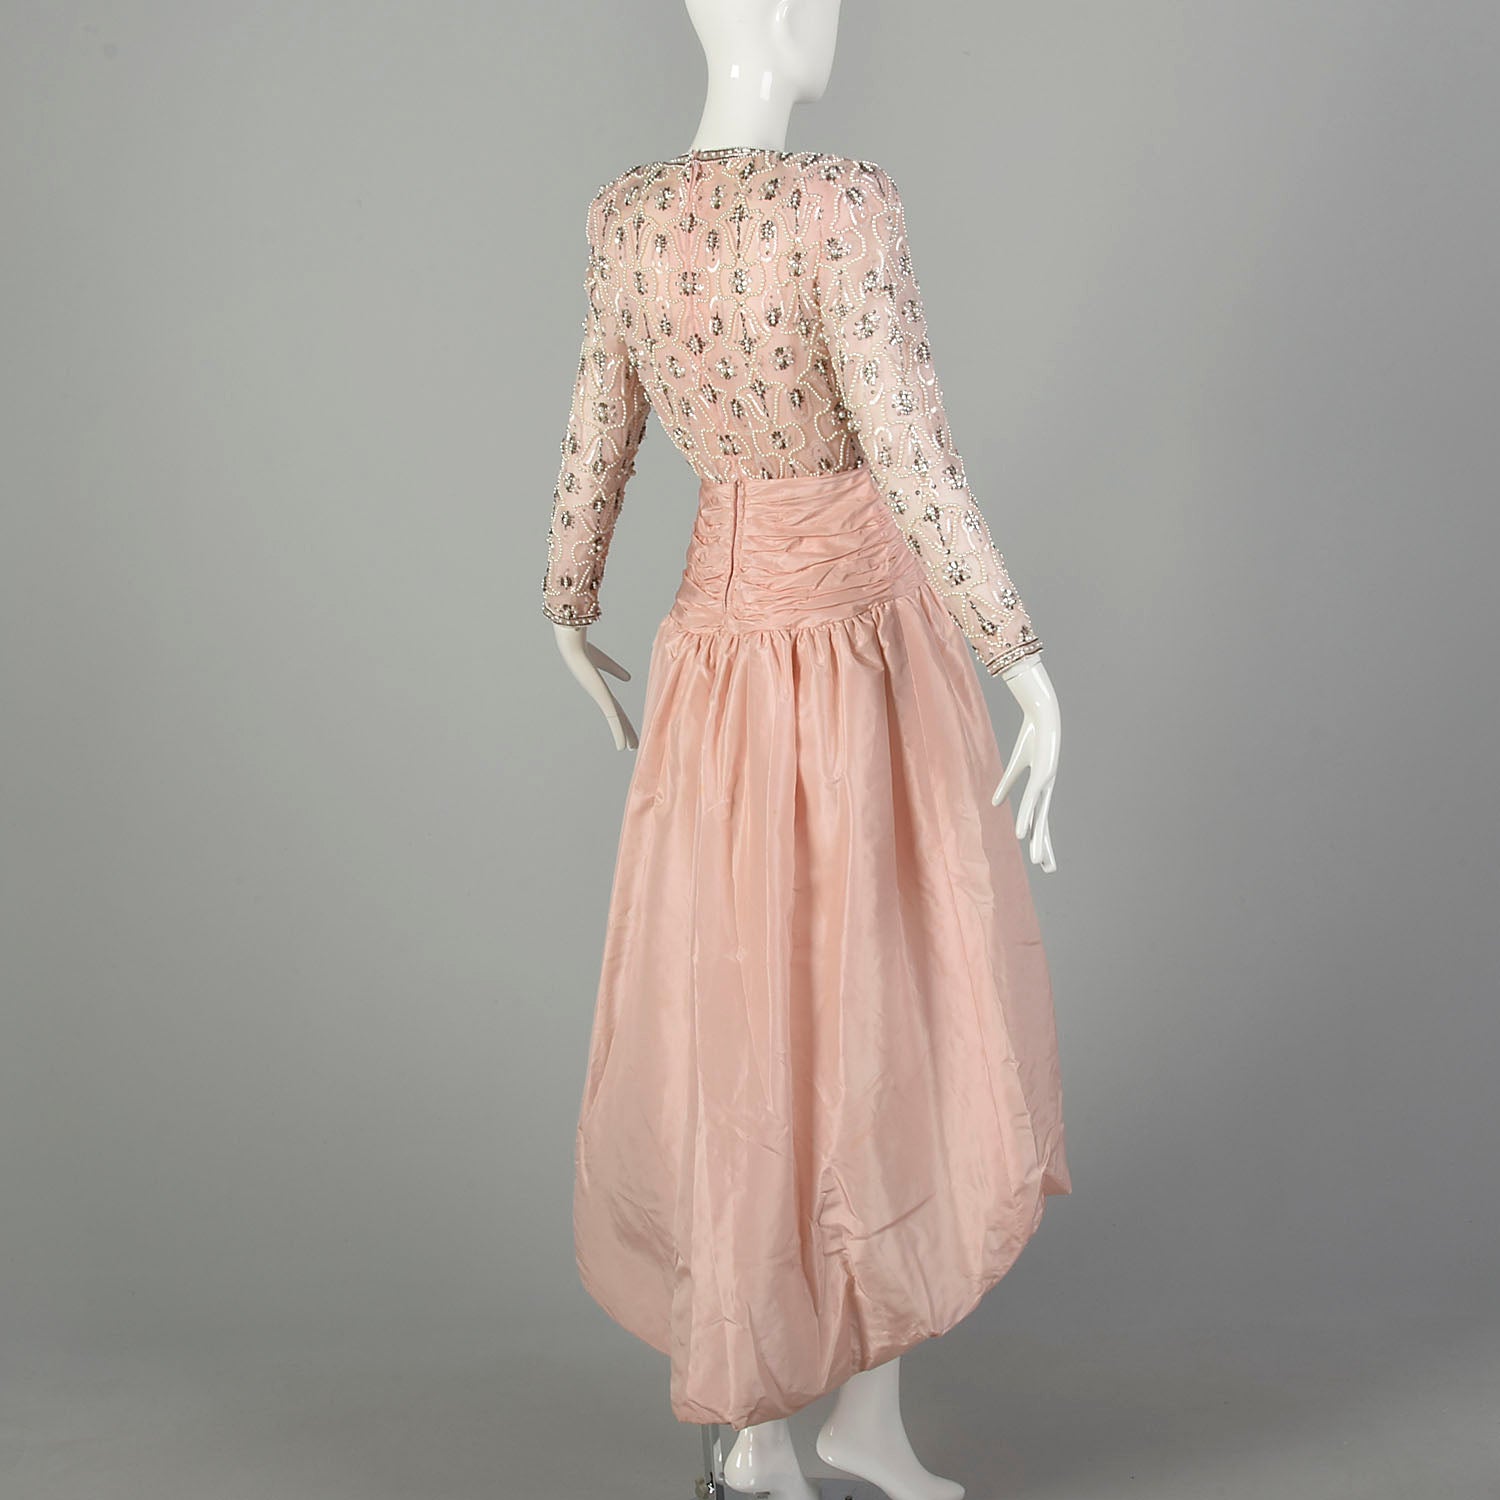 XS 1980s Victoria Royal Evening Gown Hi-Lo Skirt Beaded Pearl Bodice Pink Taffeta